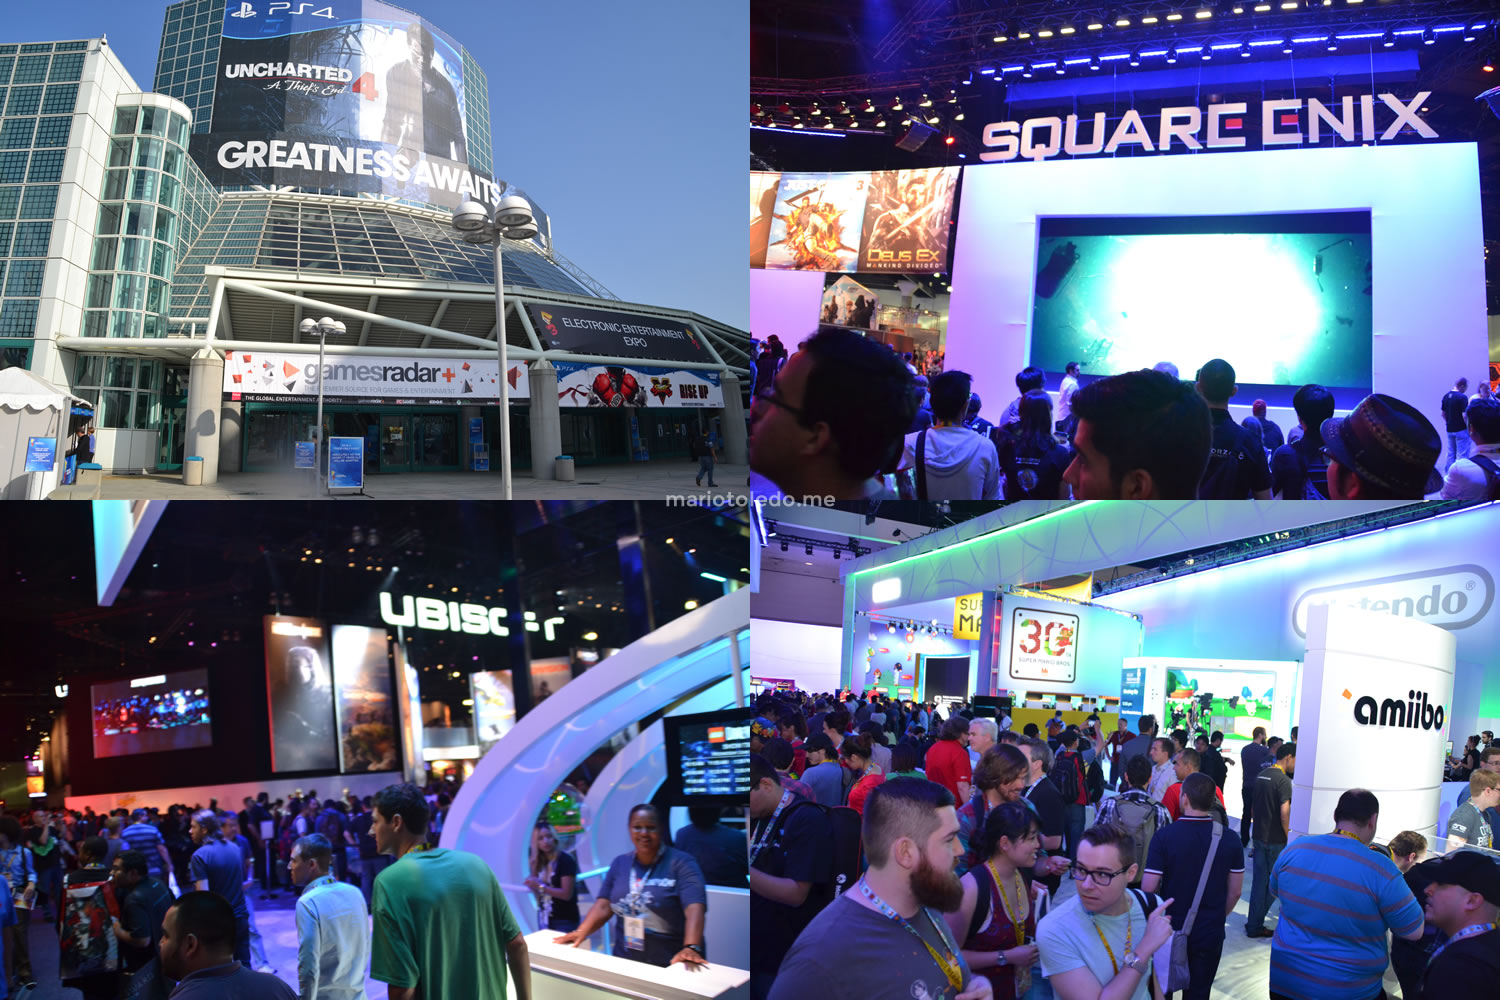 E3 Expo from inside.